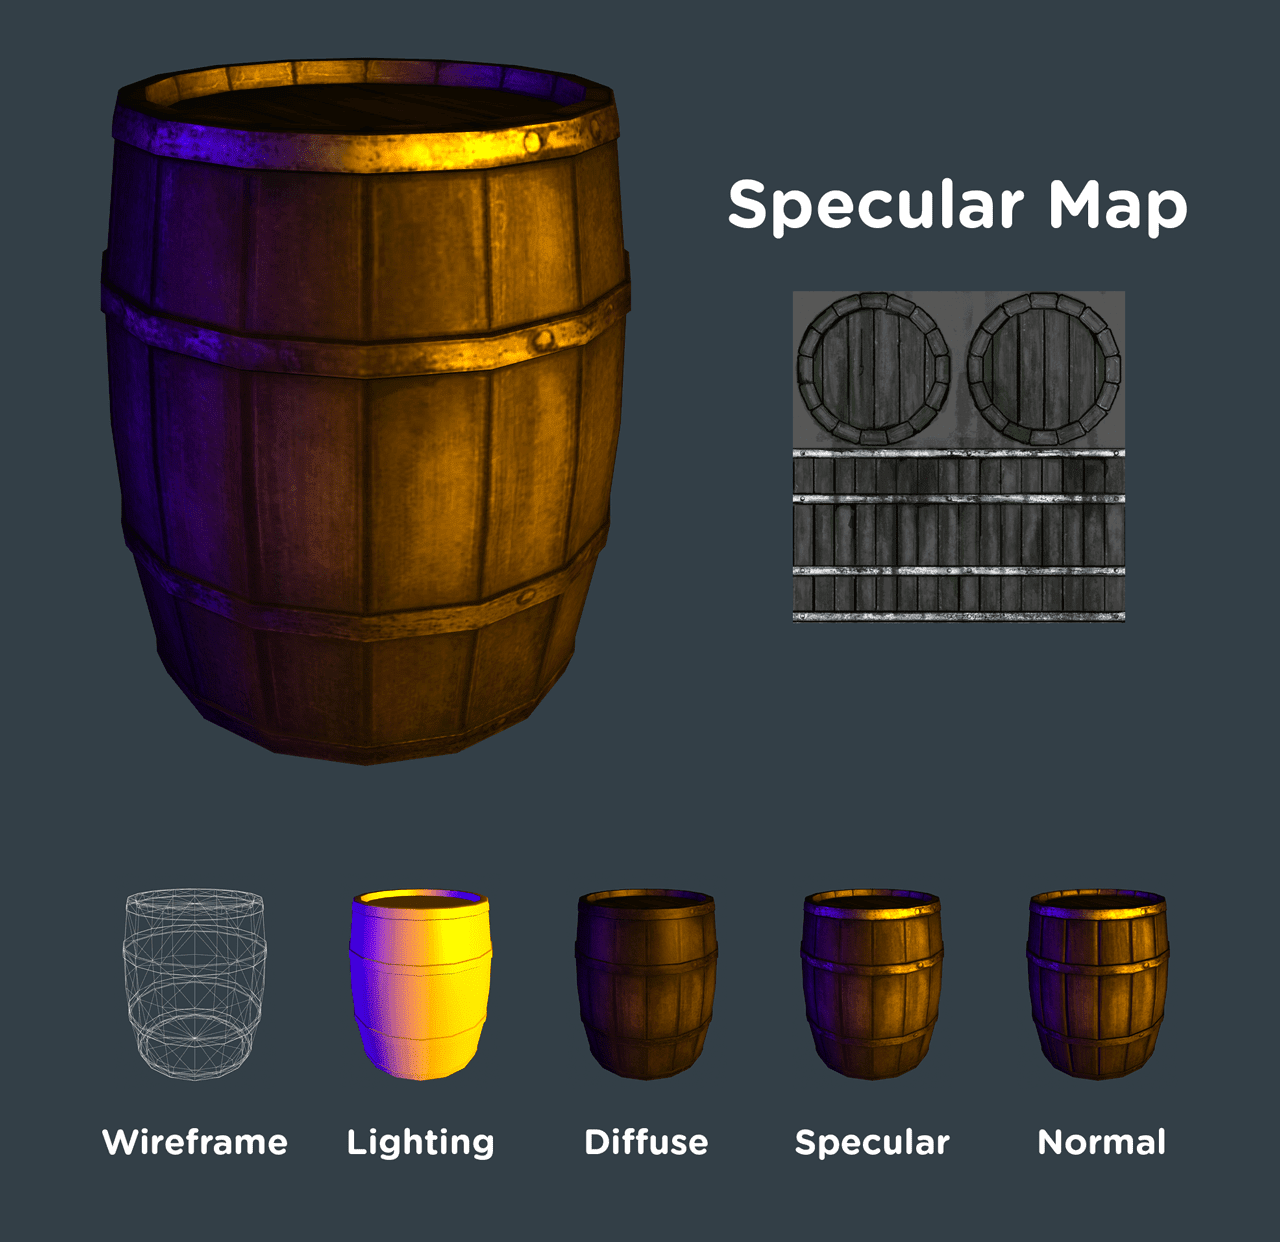 Specular map applied to the geometry.